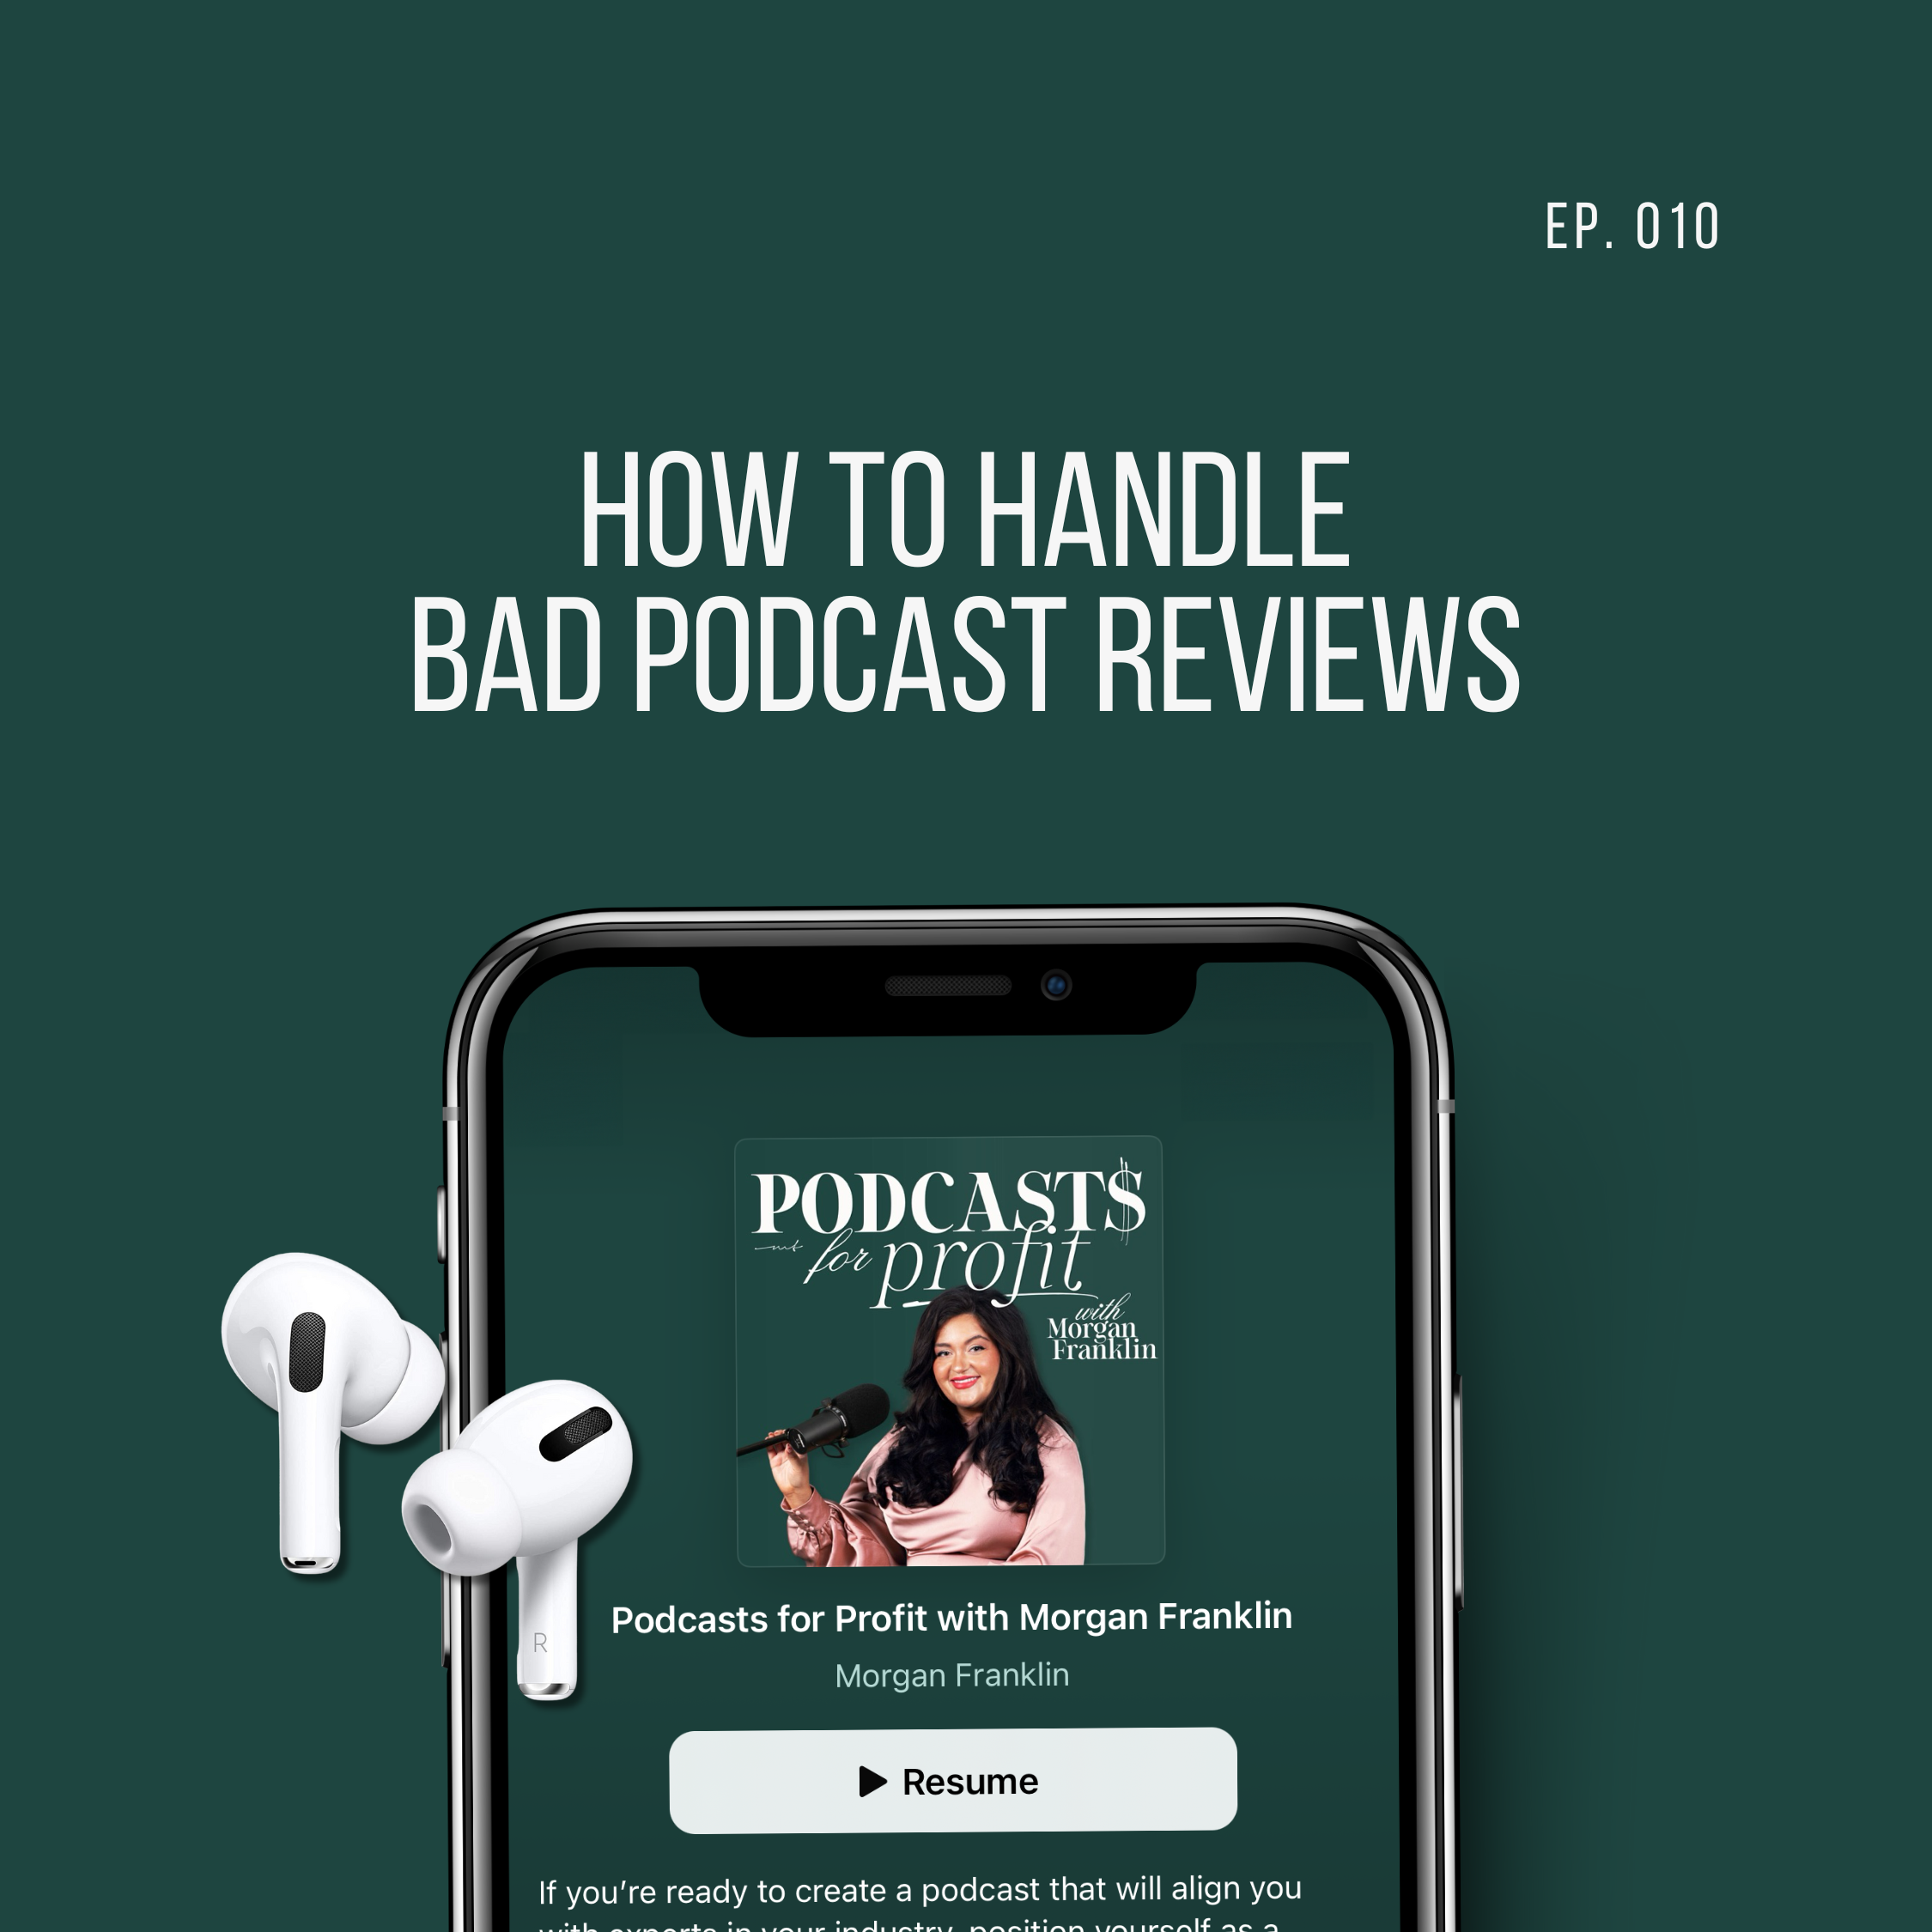 How to Deal with Bad Podcast Reviews